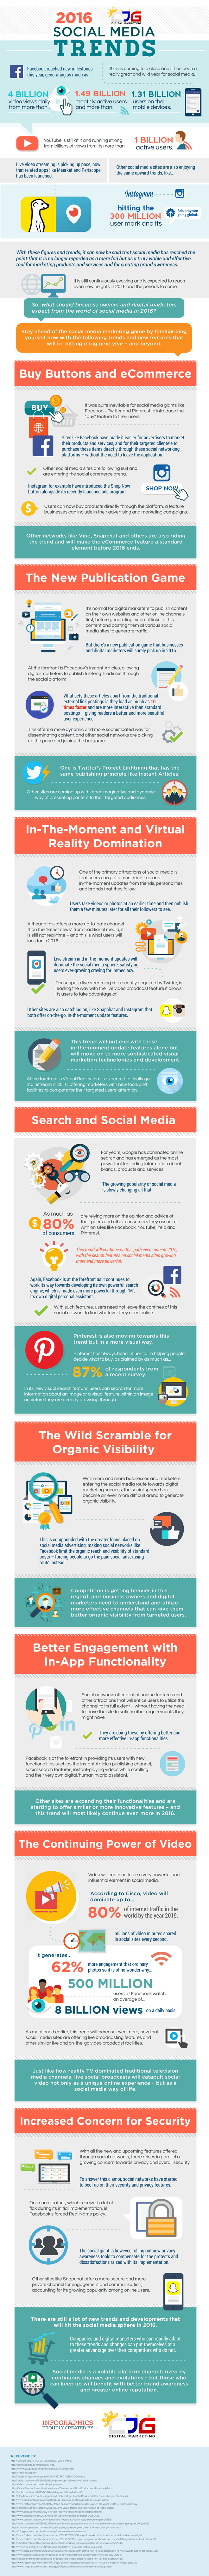 The Top 8 Social Media Trends to Watch Out For in 2016 (Infographic) - An Infographic from CJG Digital Marketing